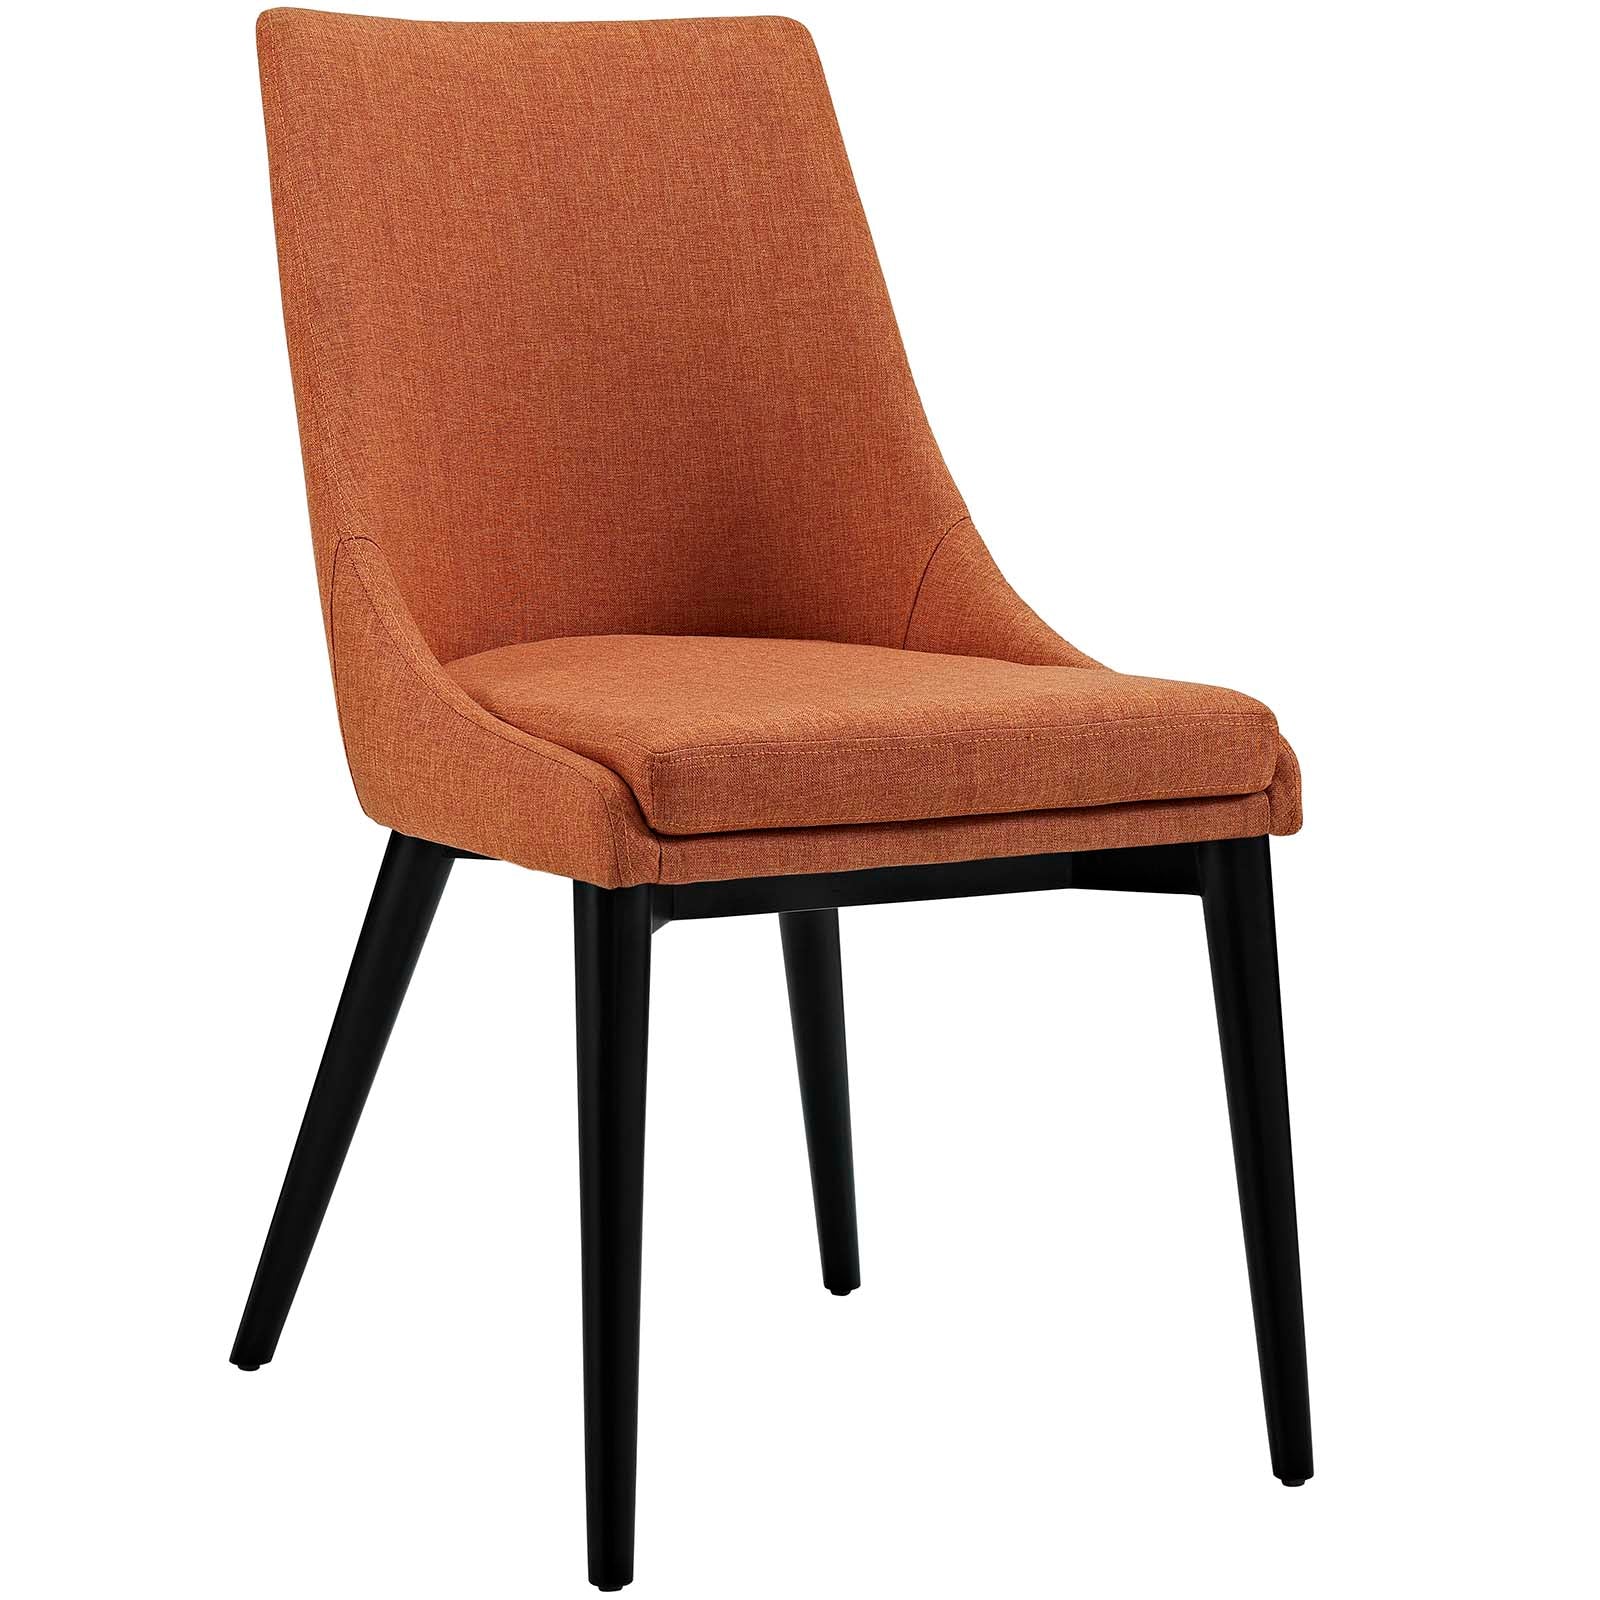 Modway Dining Chairs - Viscount Fabric Dining Chair Orange